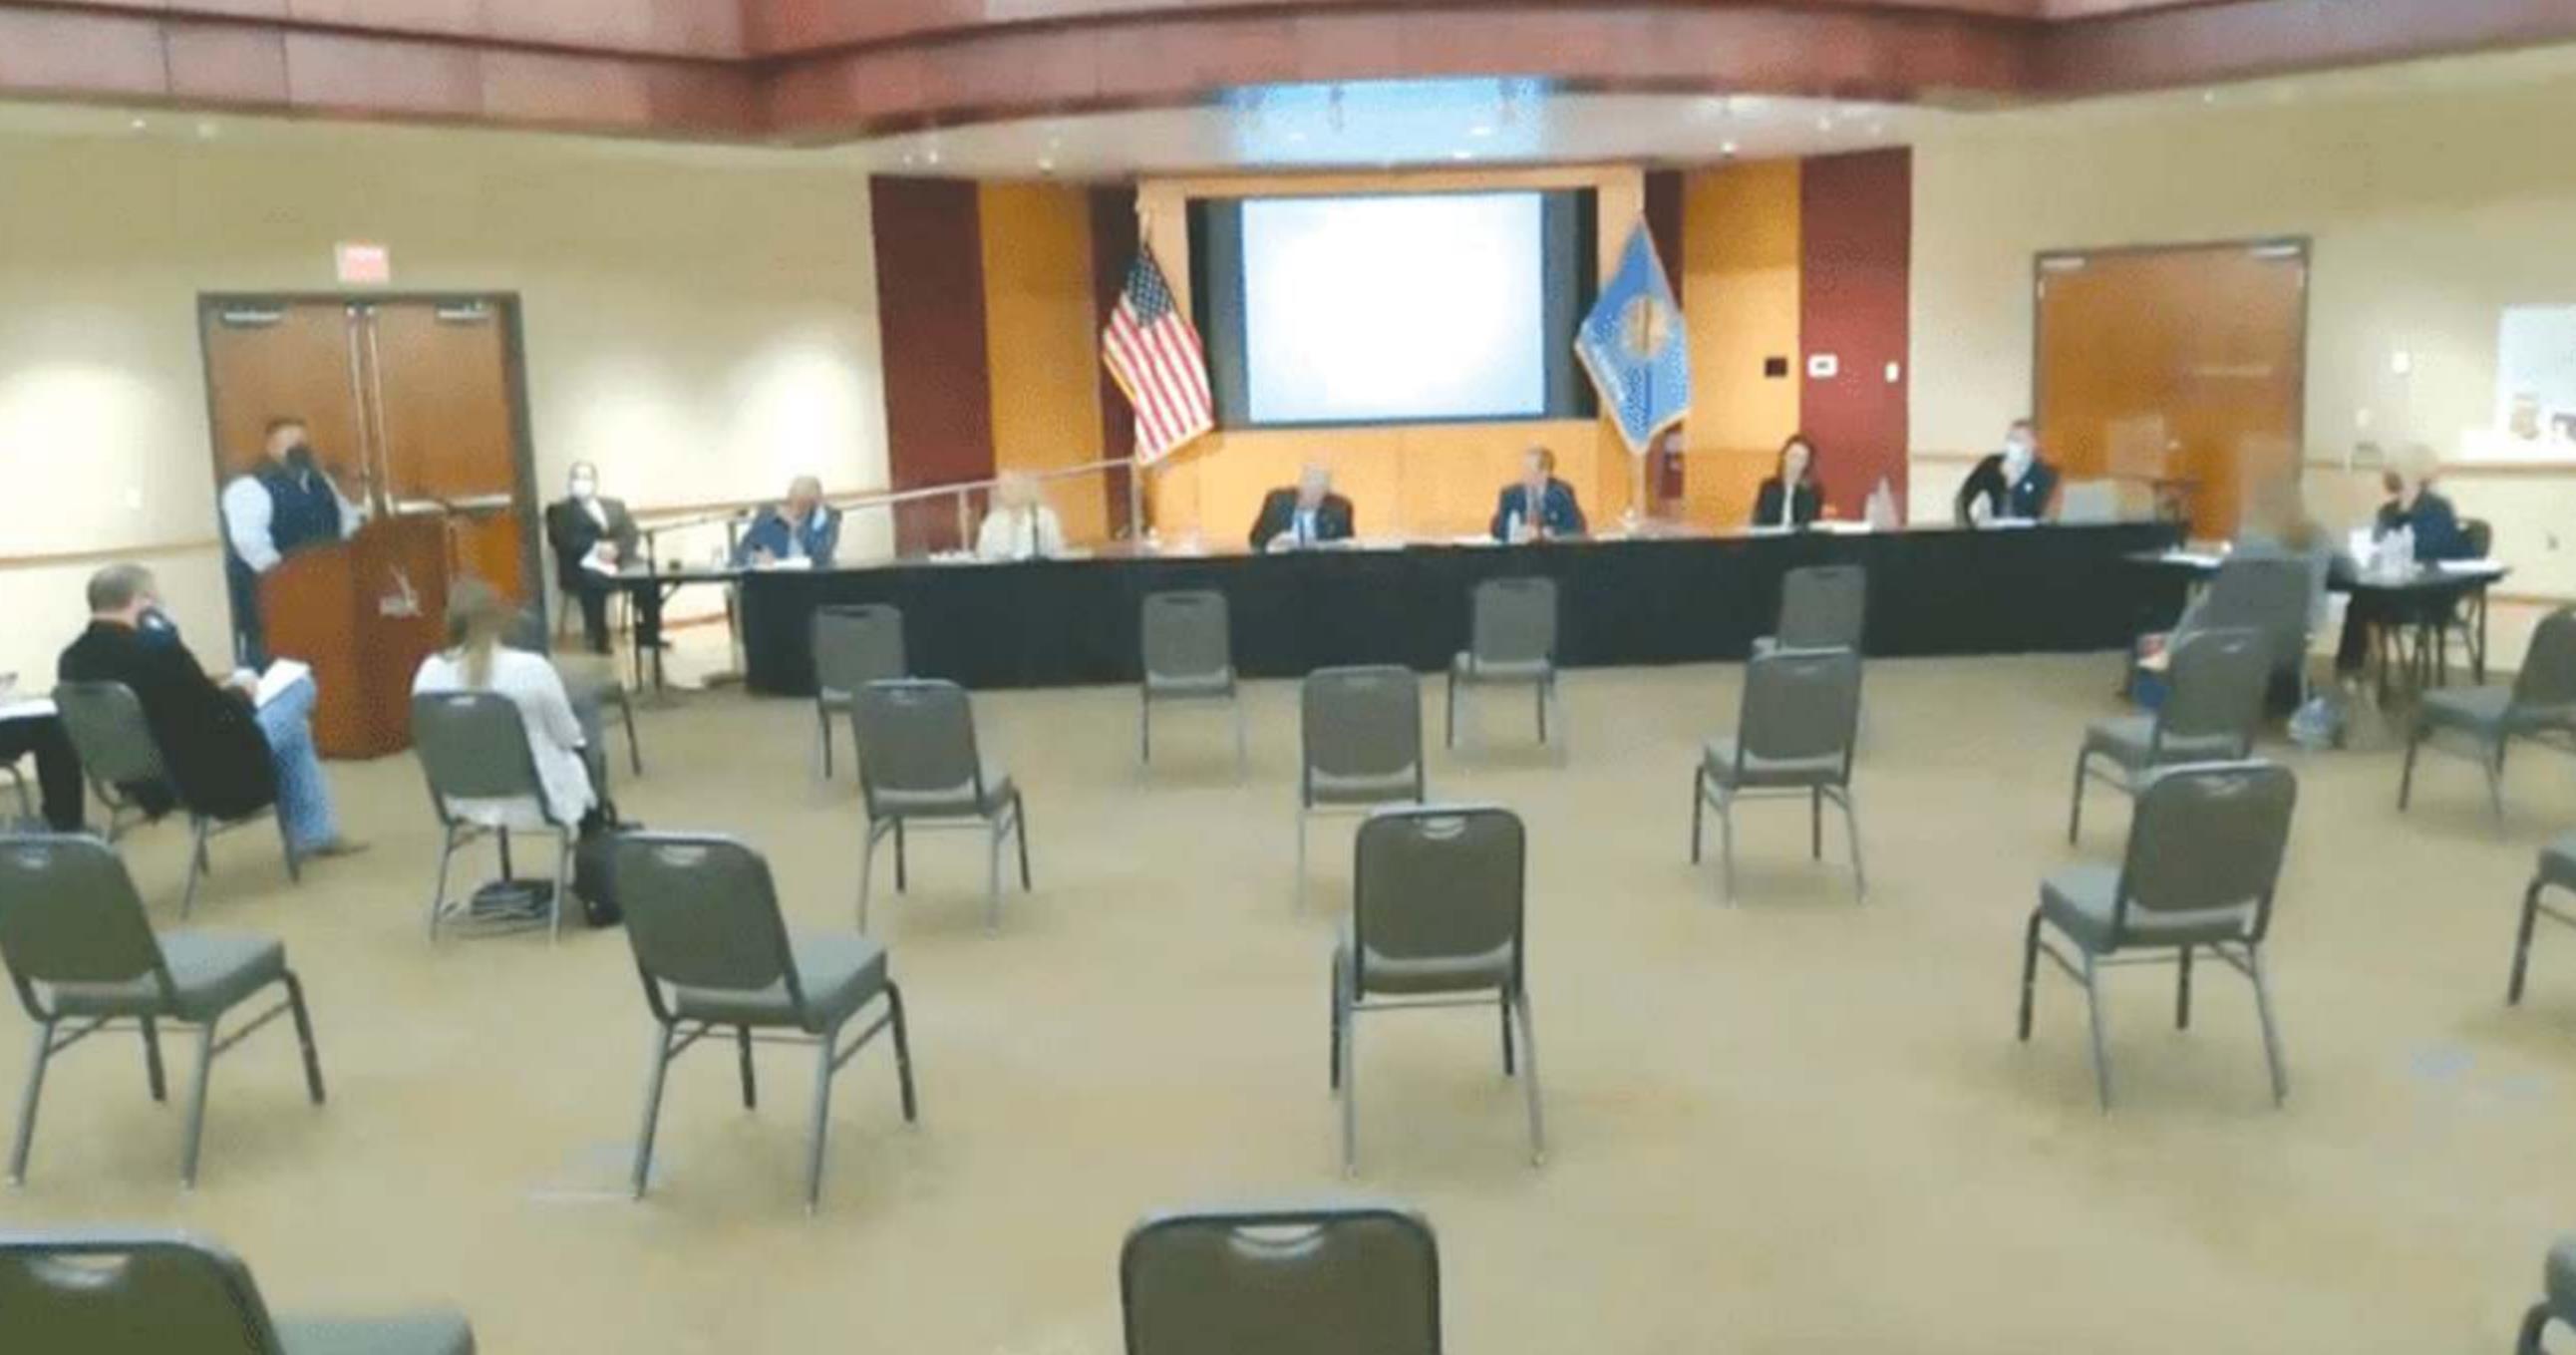 A screenshot of a live-streamed meeting of Oklahoma’s Statewide Virtual Charter School Board on October 13, 2020. The man at the podium on the left of the screen spoke about his son’s success at Epic Charter Schools. The schools are under intense scrutiny following a scathing report from the state auditor’s office that accused the school of misusing taxpayer money. Provided